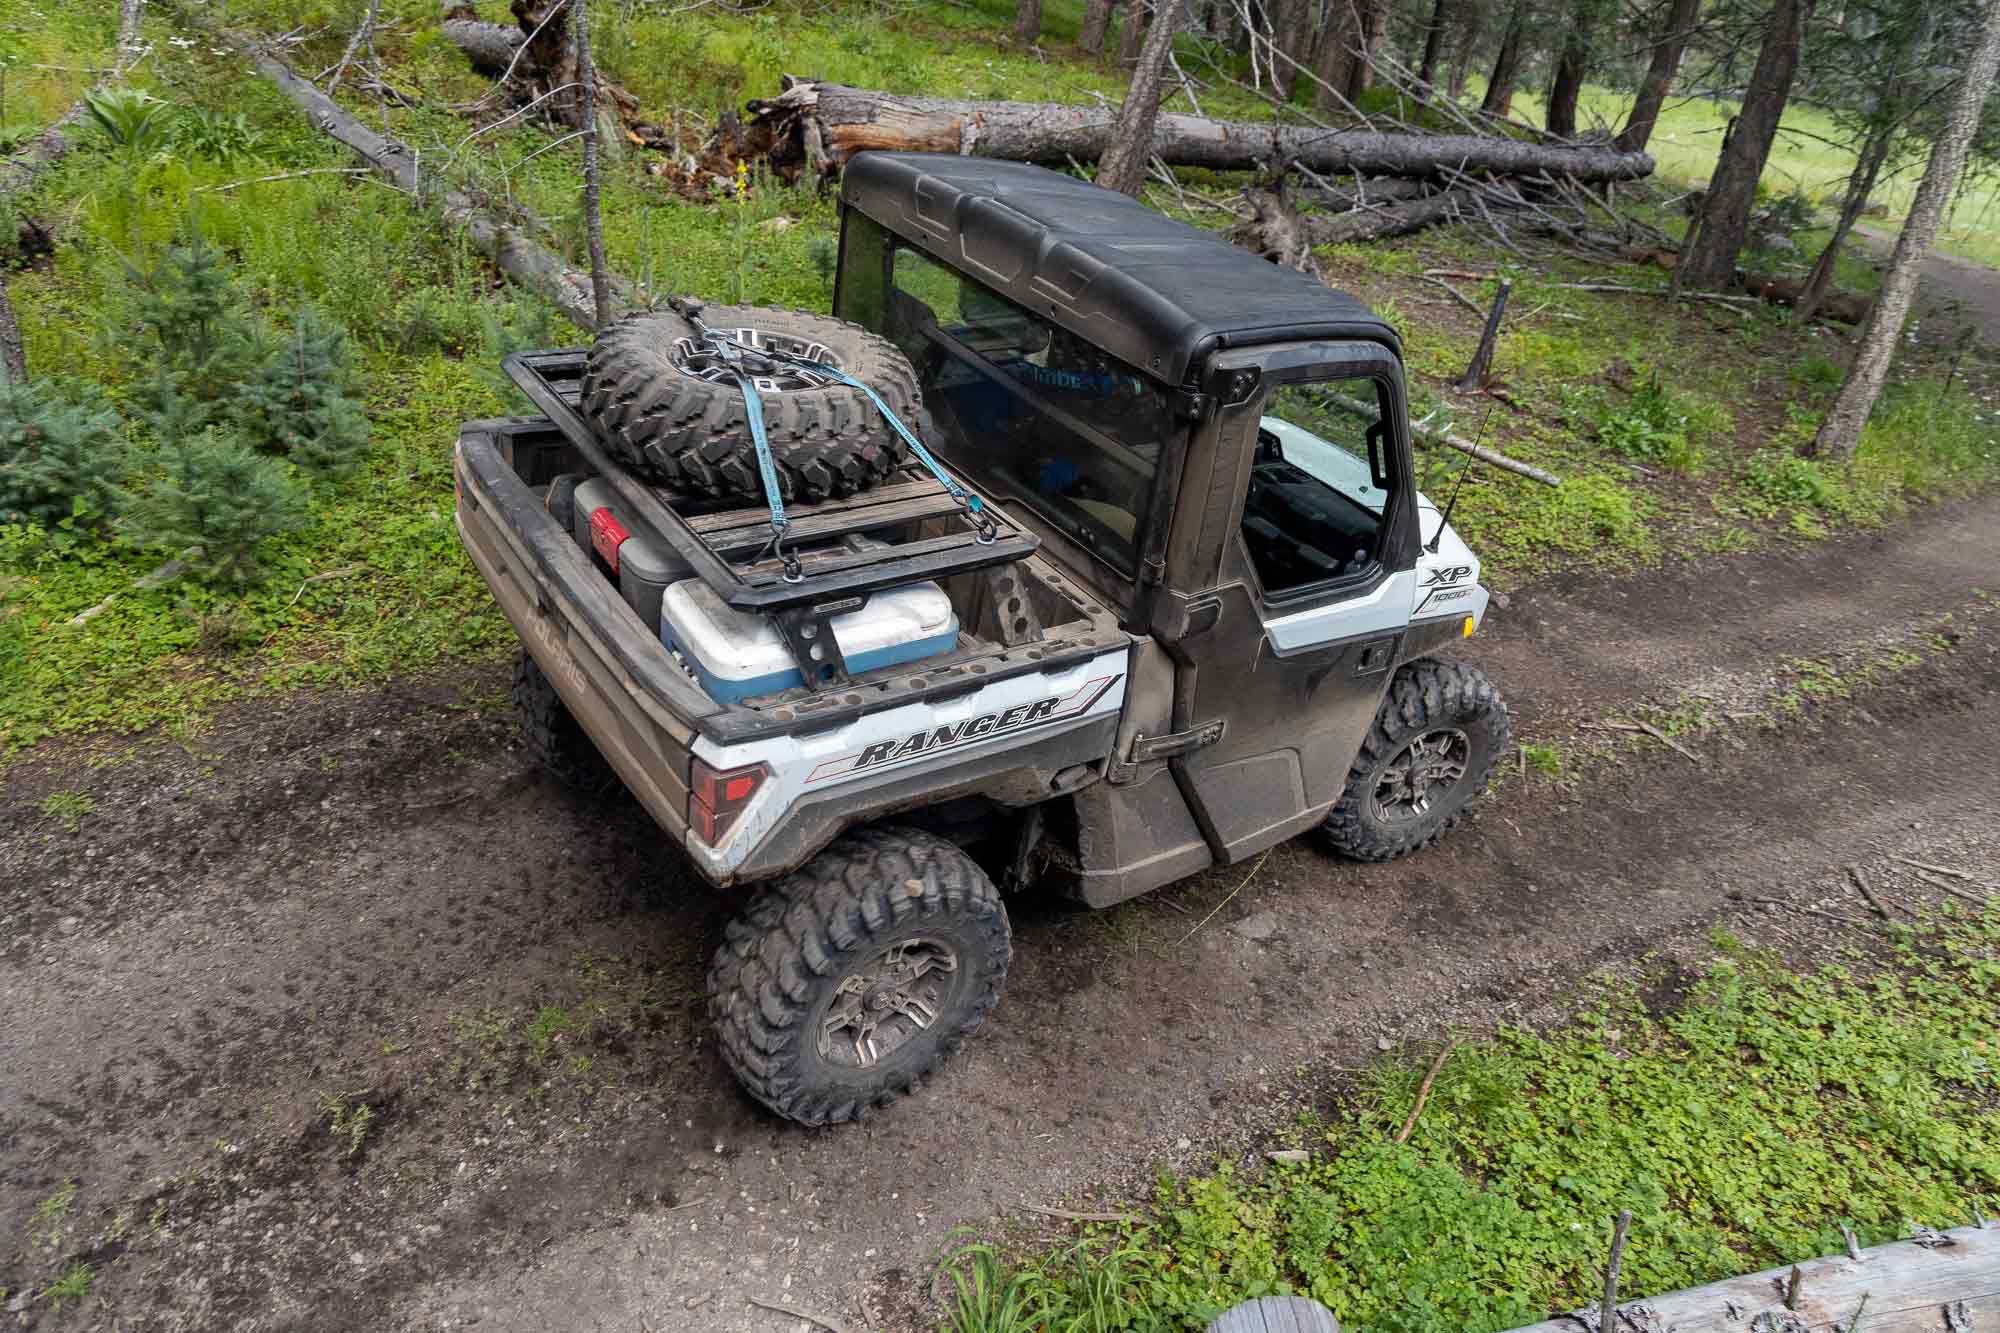 The Rhino-Rack system adds utility to an already capable UTV.